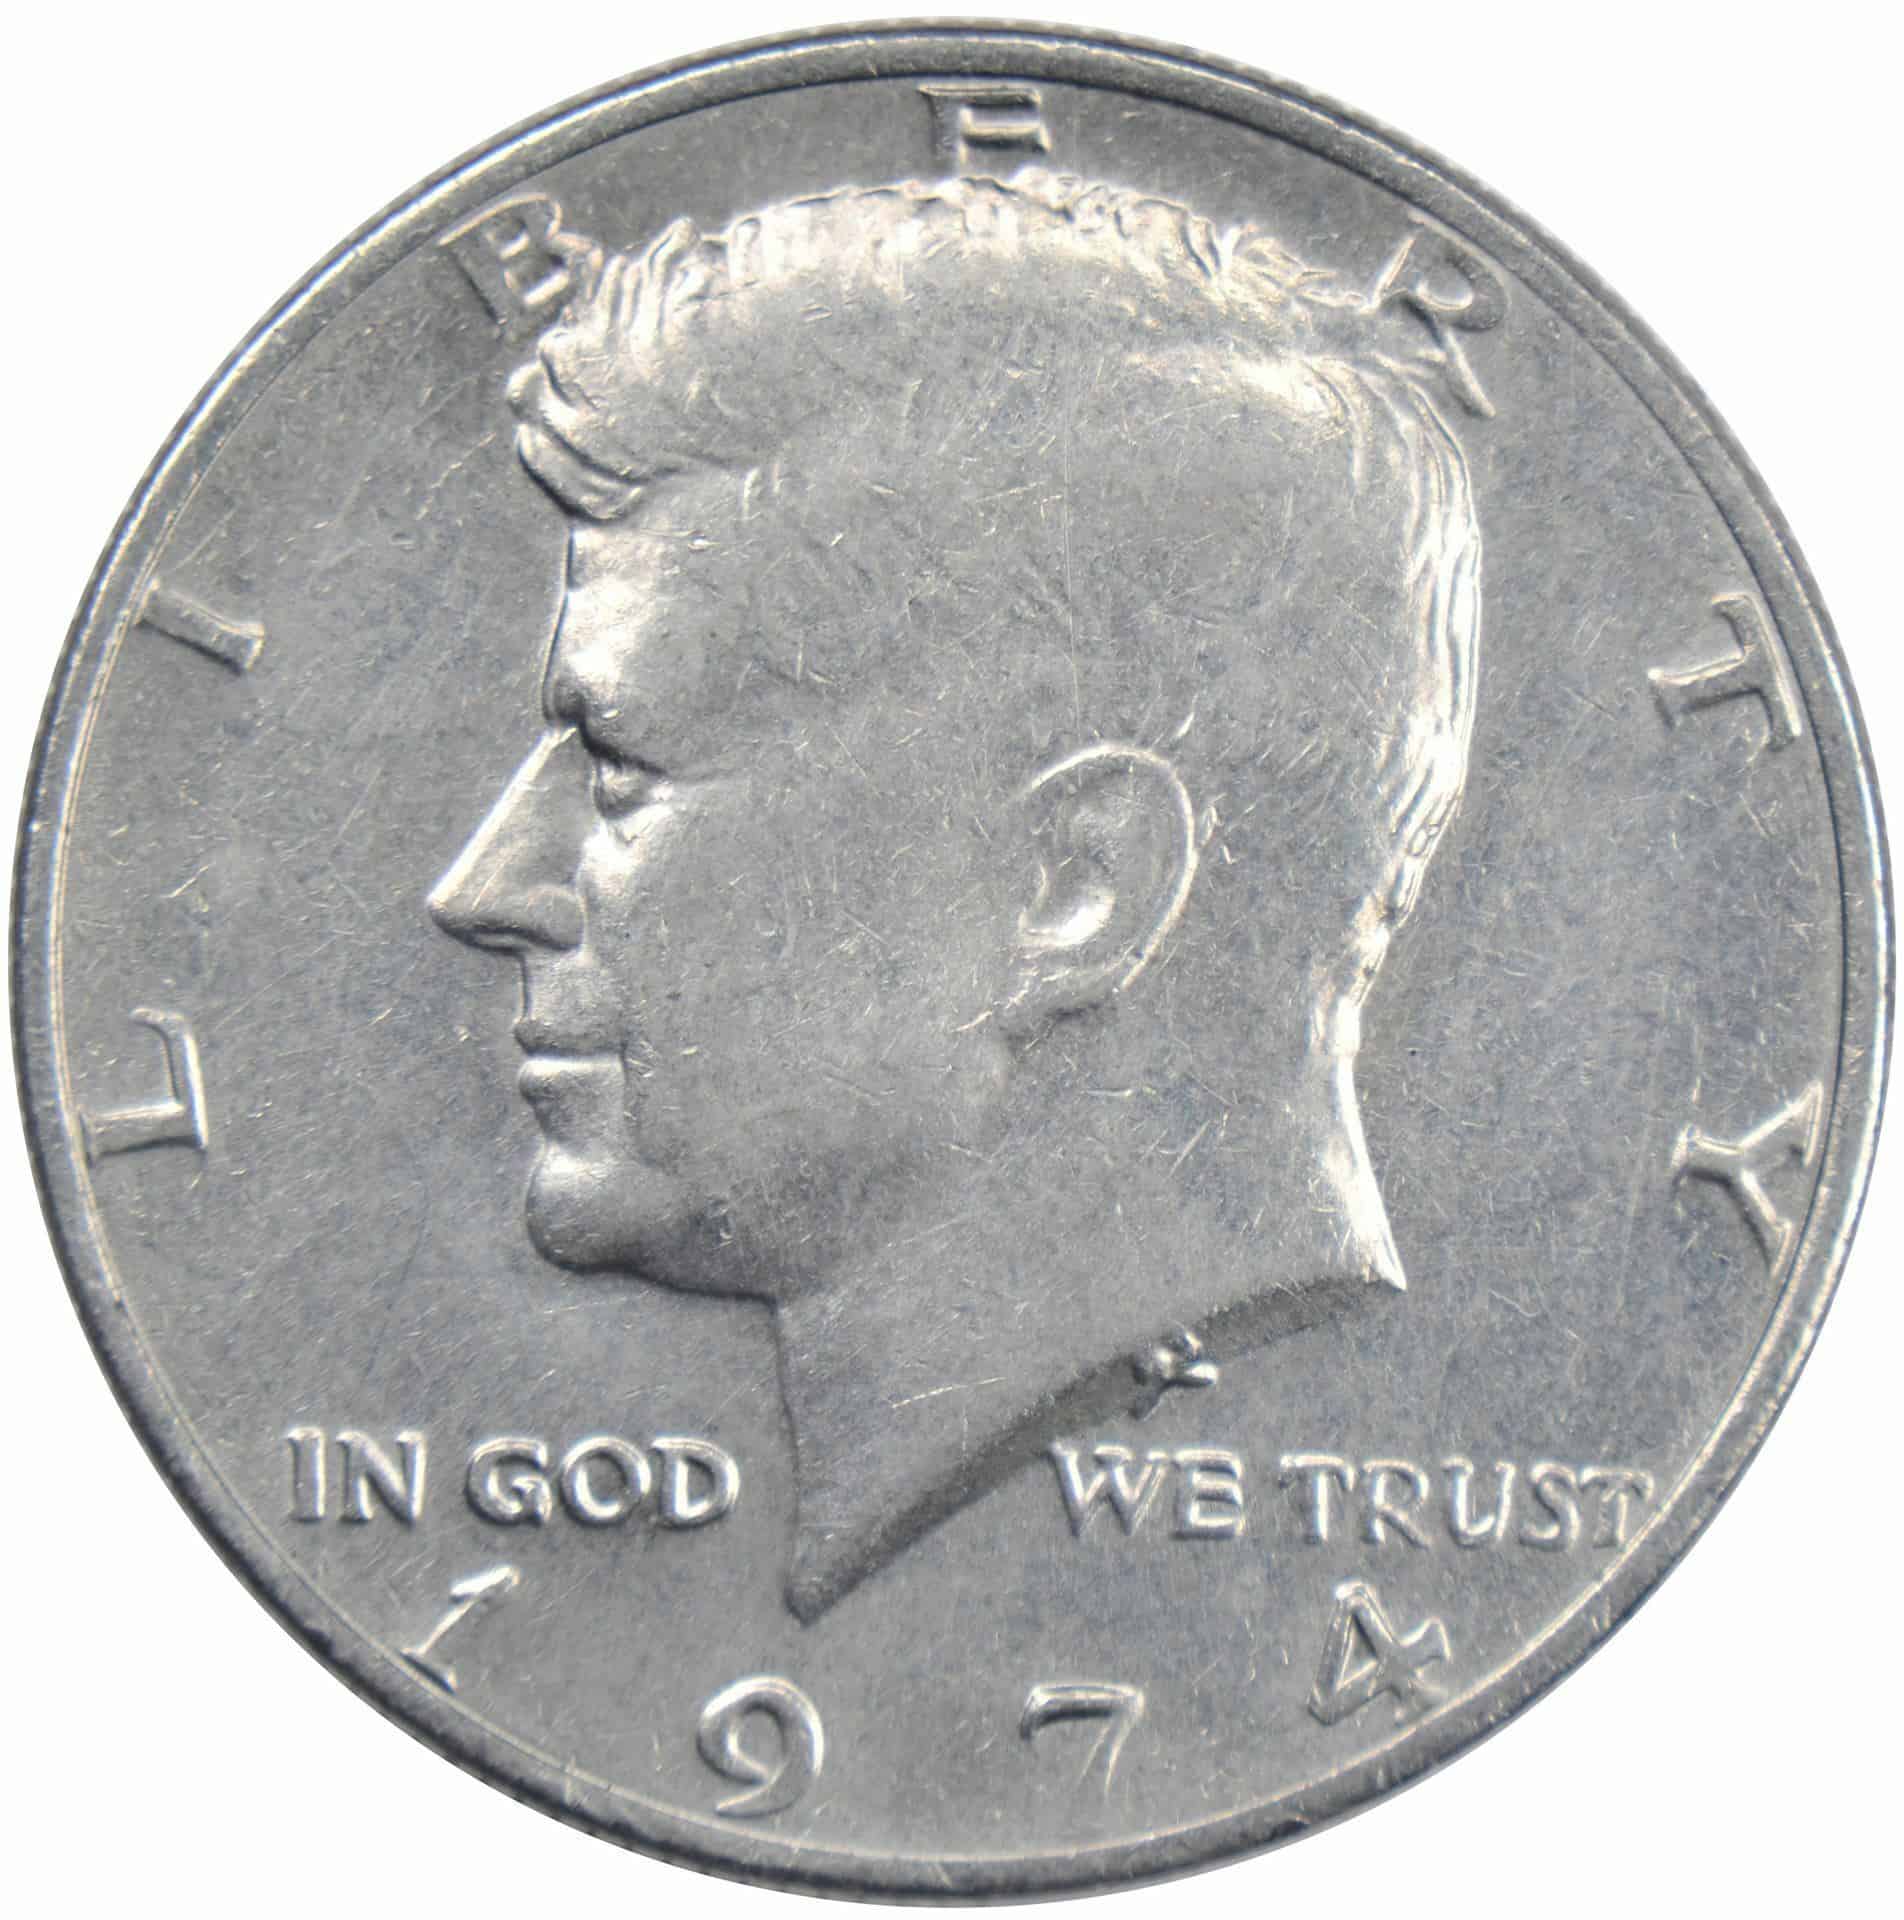 The Obverse of the 1974 Half Dollar